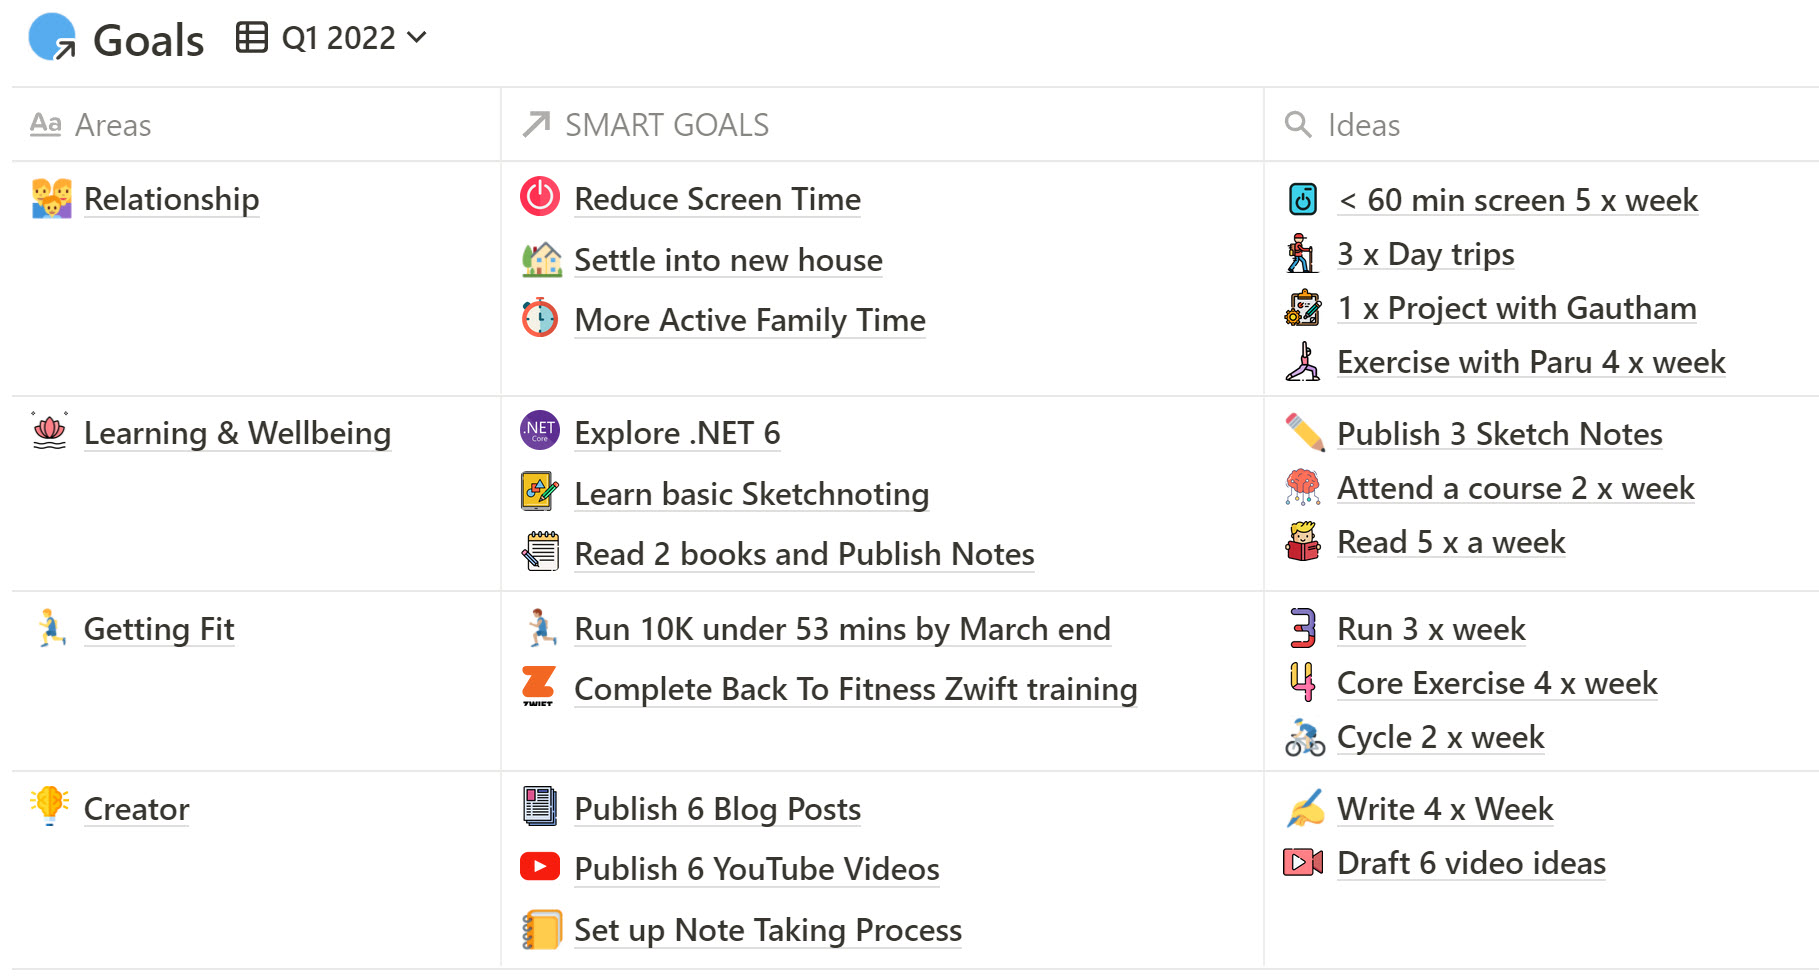 Areas, SMART Goals, and Ideas on how to achieve them - All managed in Notion